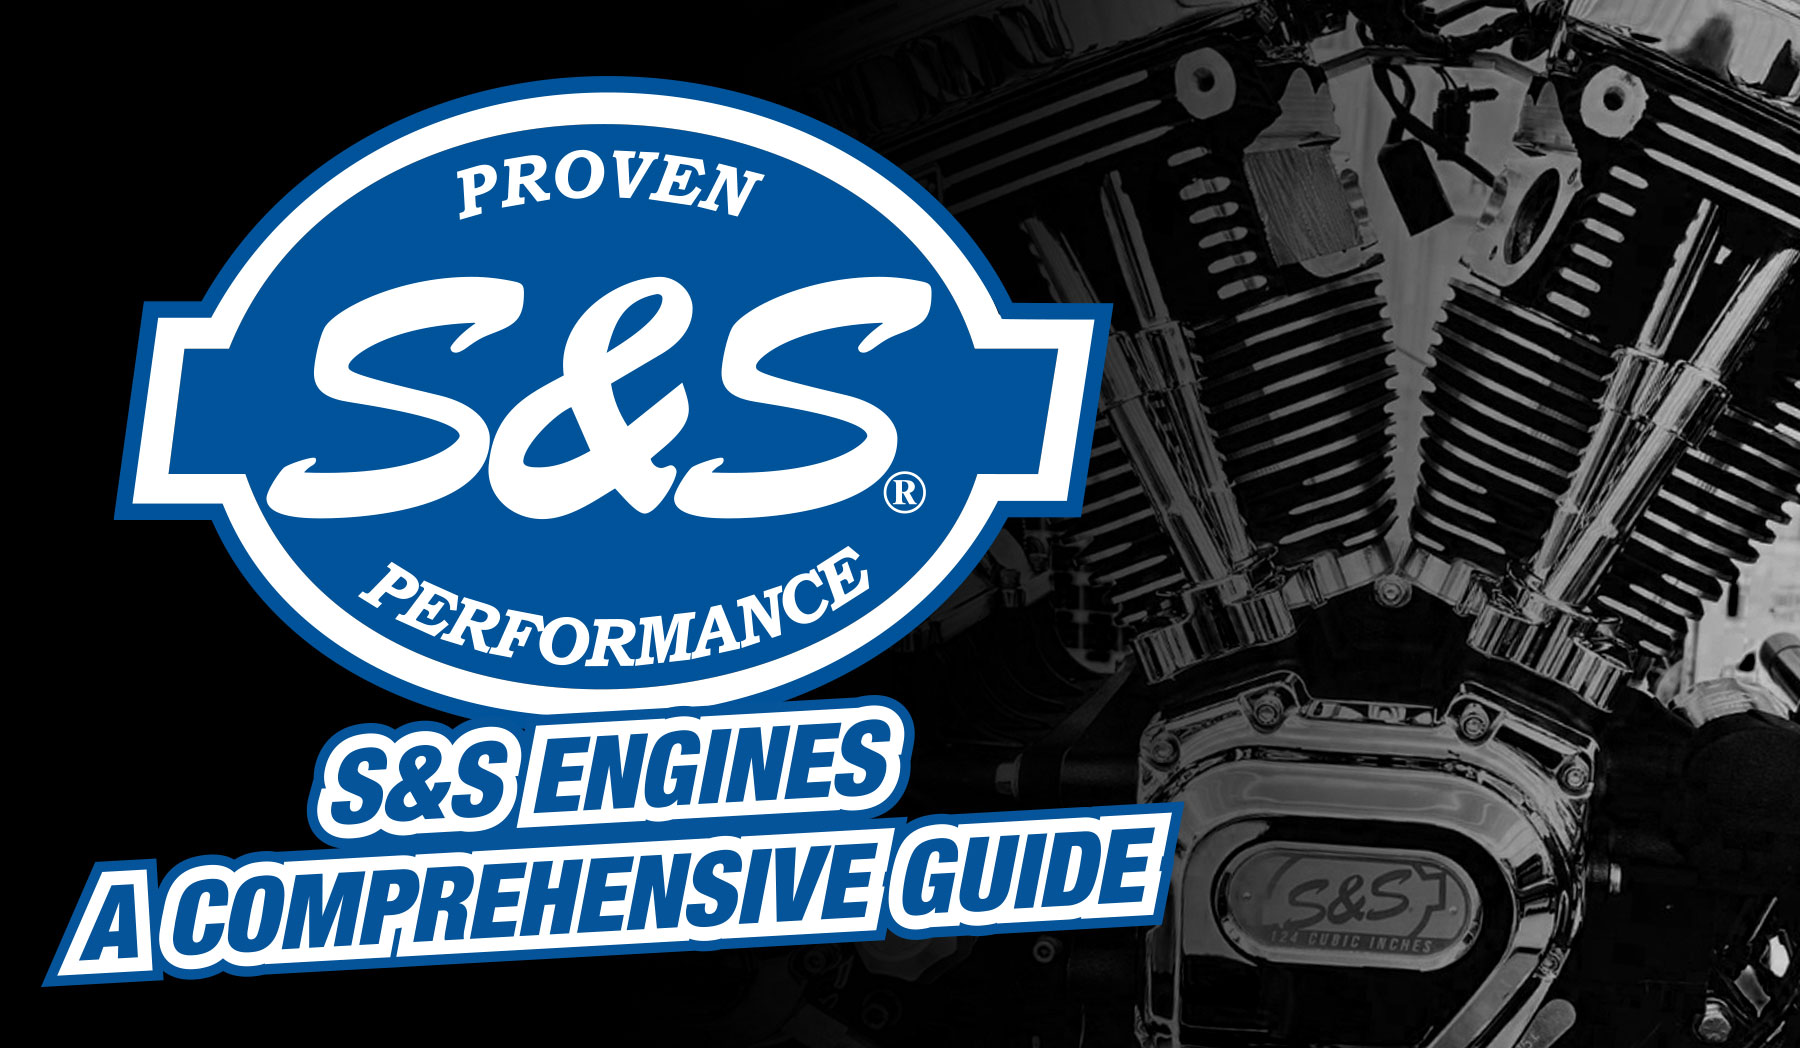 S&S Cycle Engines: A Comprehensive Guide